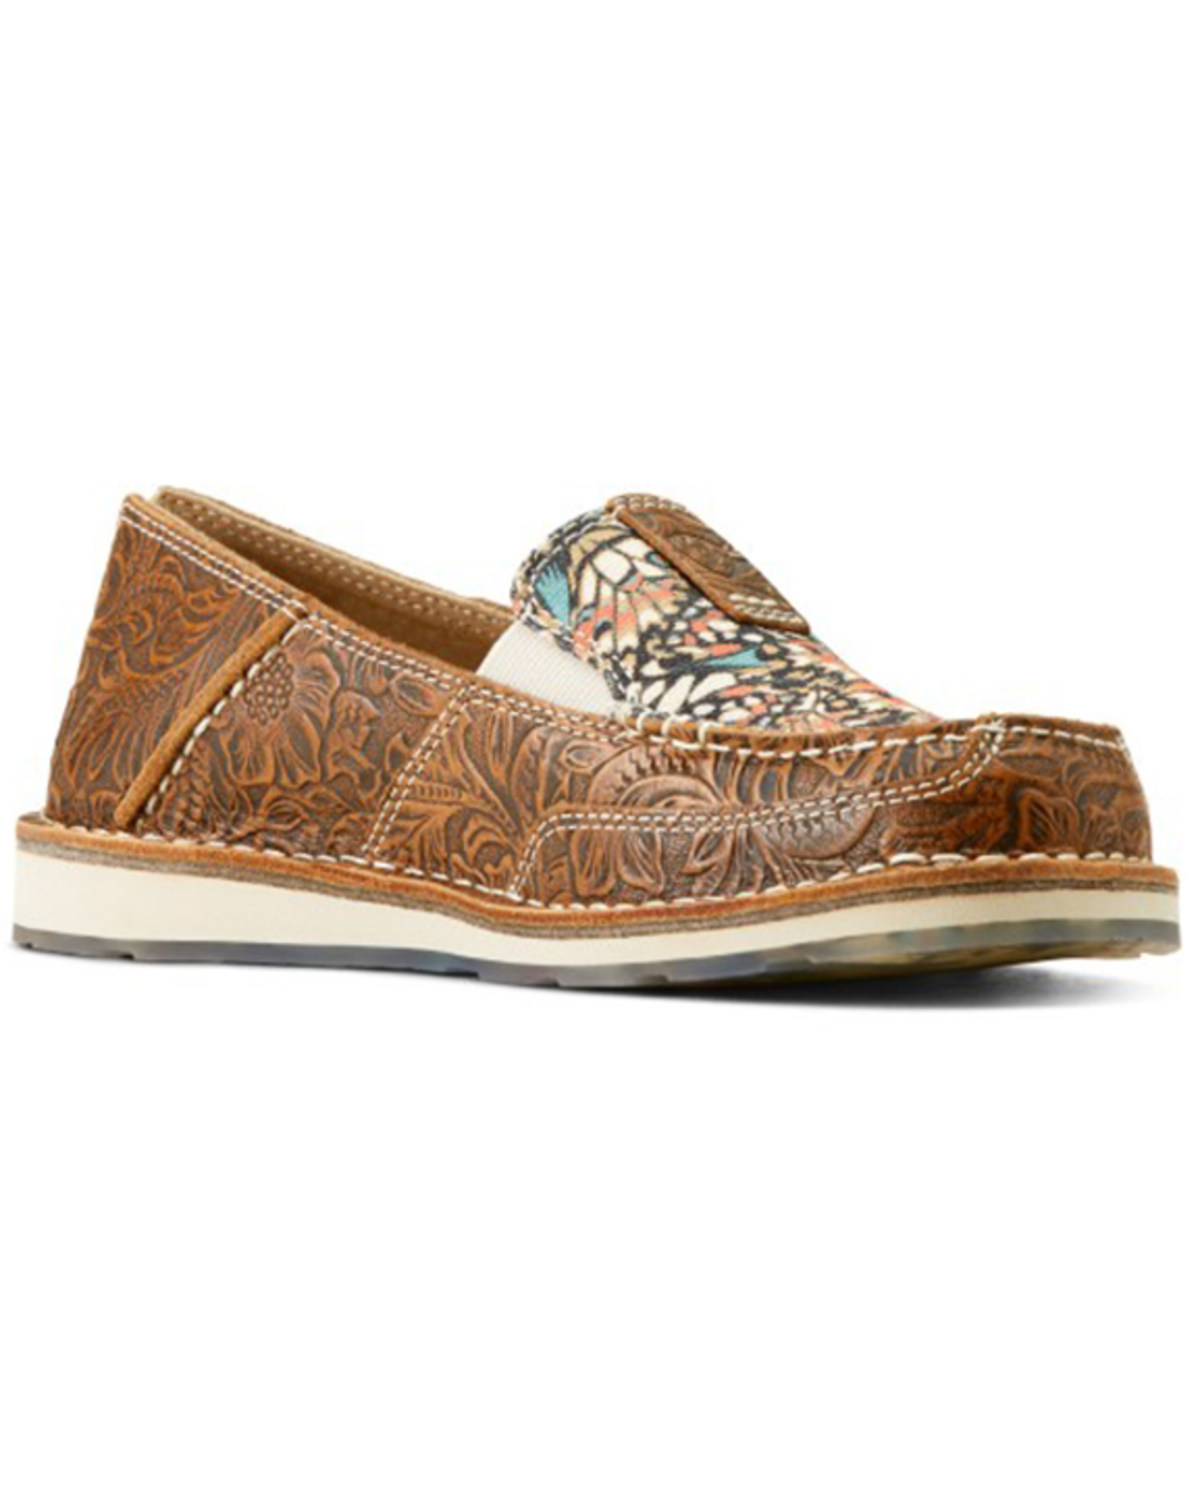 Ariat Women's Floral Embossed Cruiser Casual Shoes - Moc Toe